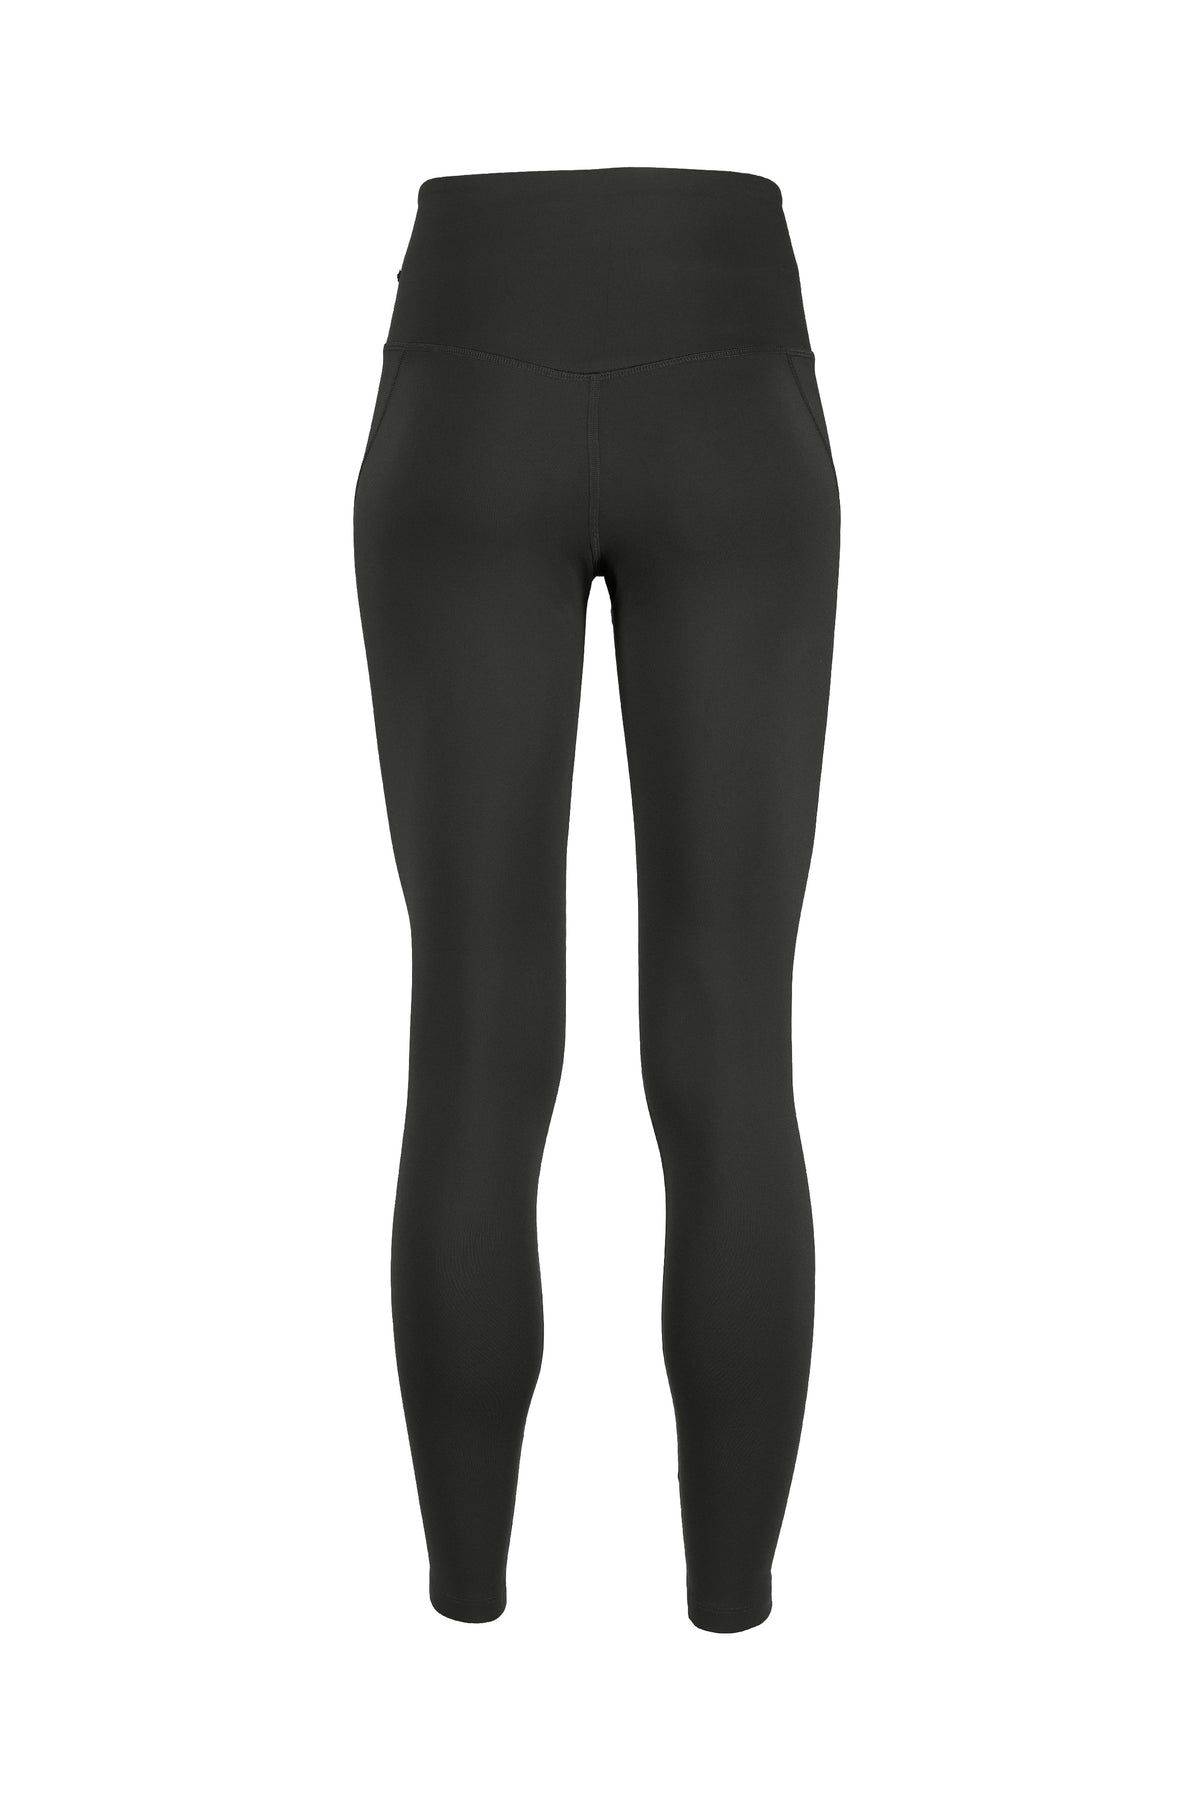 Girlfriend Collective High Rise Leggings Long – SustStyle